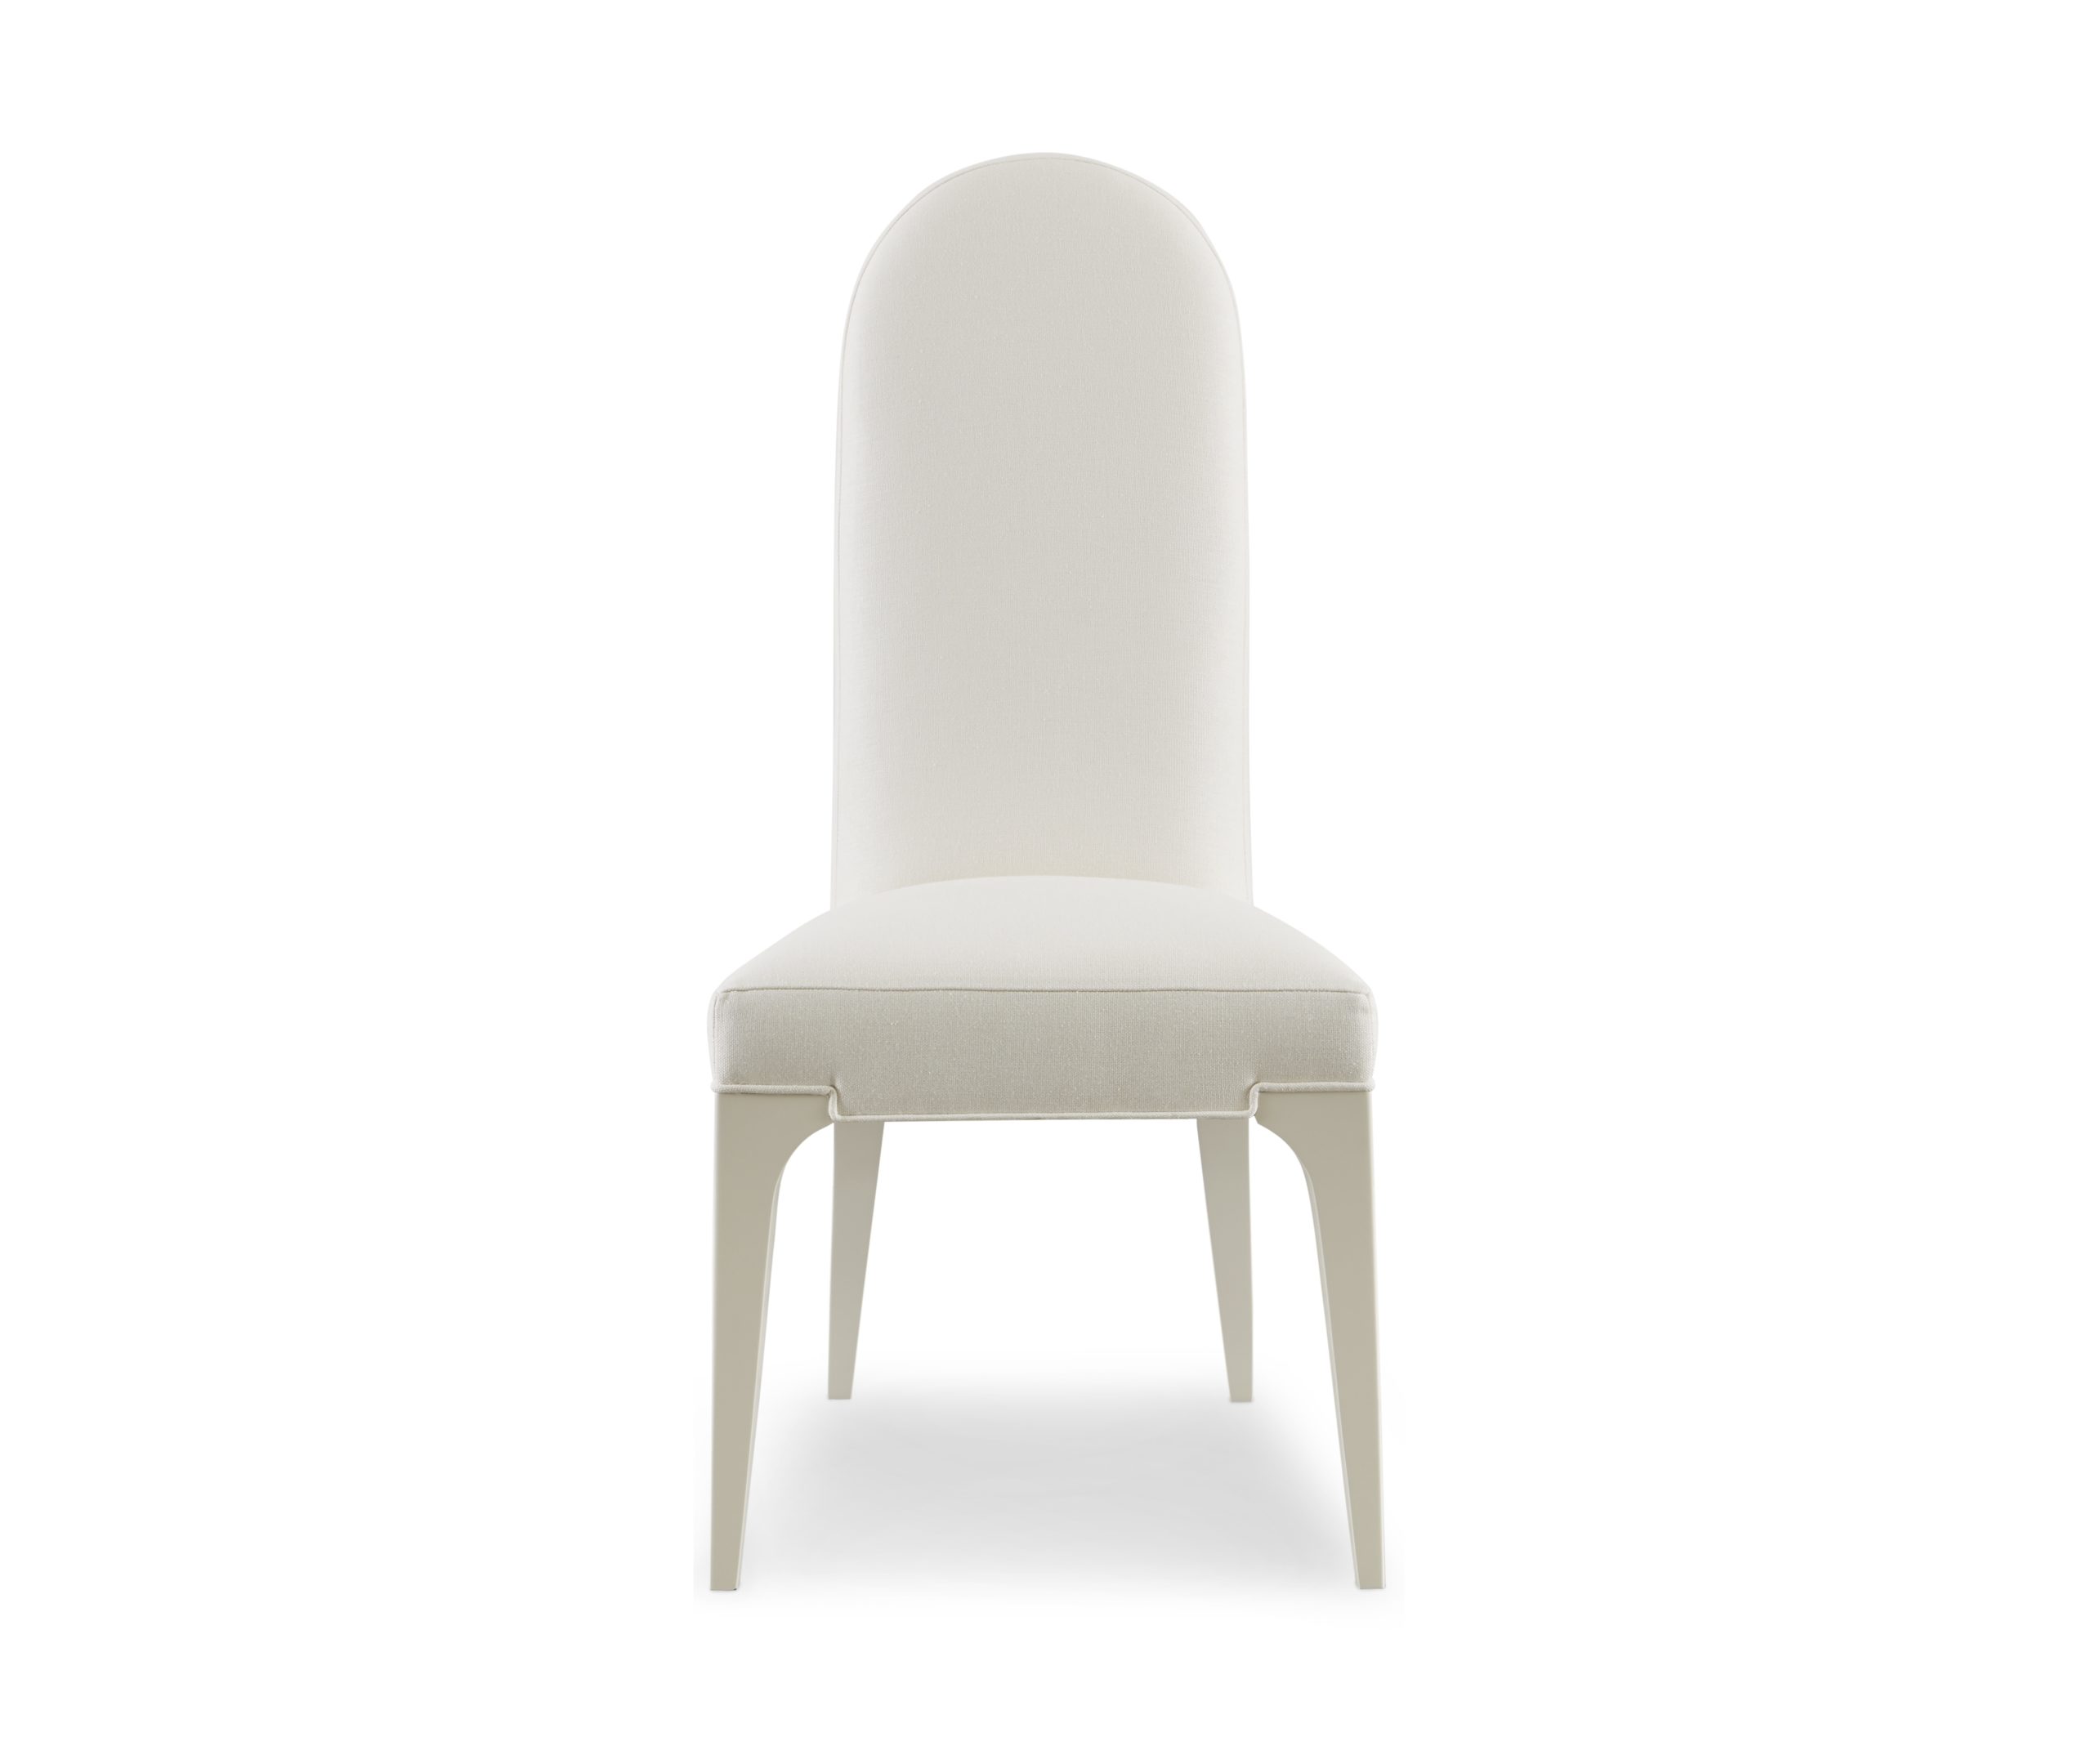 Baker_products_WNWN_declan_chair_BAA3041_FRONT-scaled-2